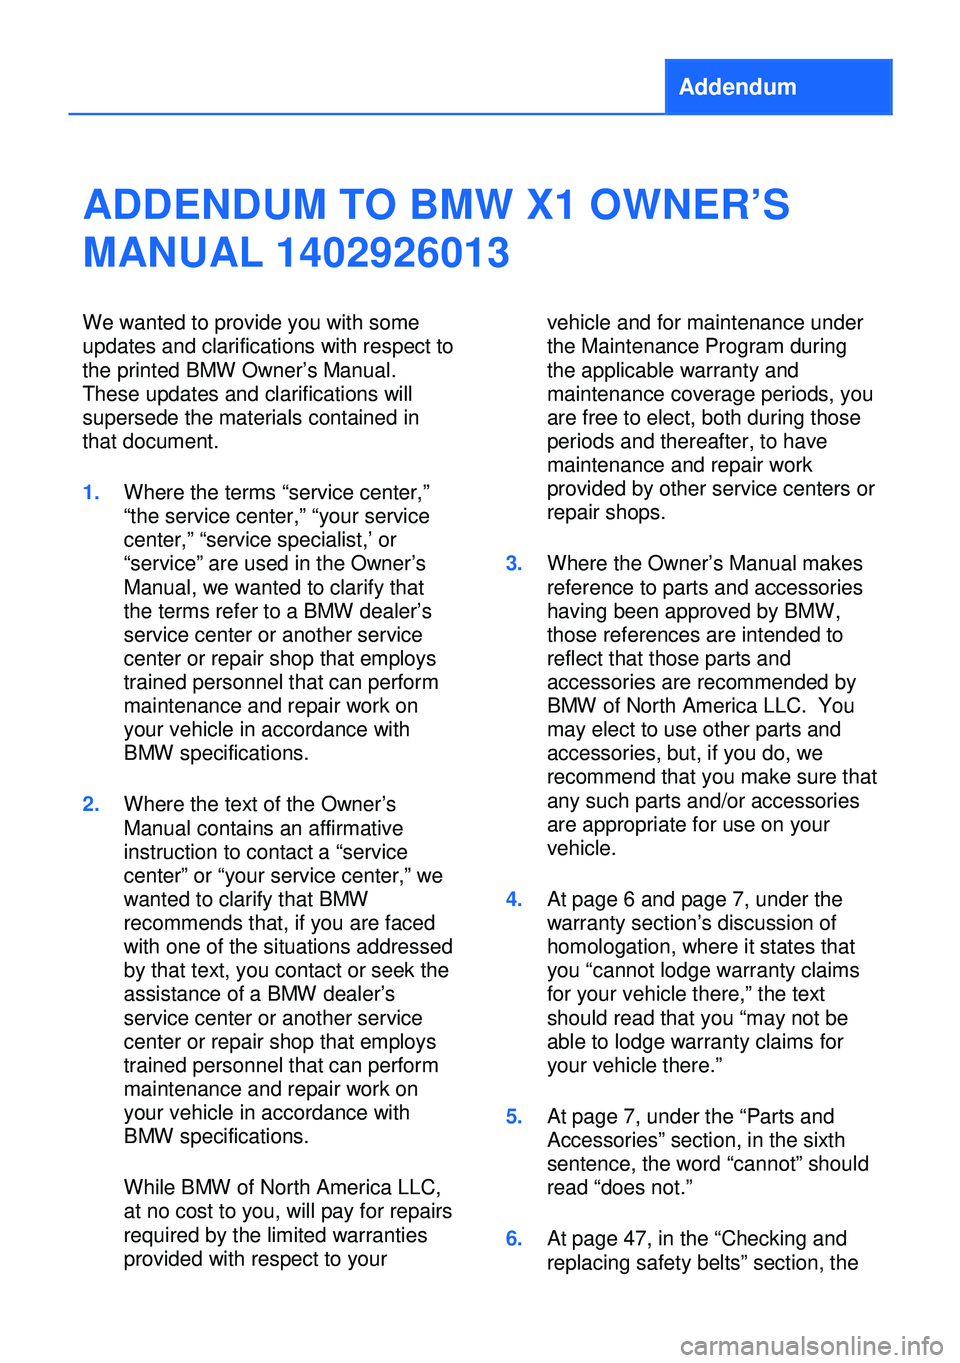 BMW X1 2013 E84 Owners Manual Addendum
ADDENDUM TO BMW X1 OWNER’S
MANUAL 1402926013
We wanted to provide you with some
updates and clarifications with respect to
the printed BMW Owner’s Manual.
These updates and clarifications